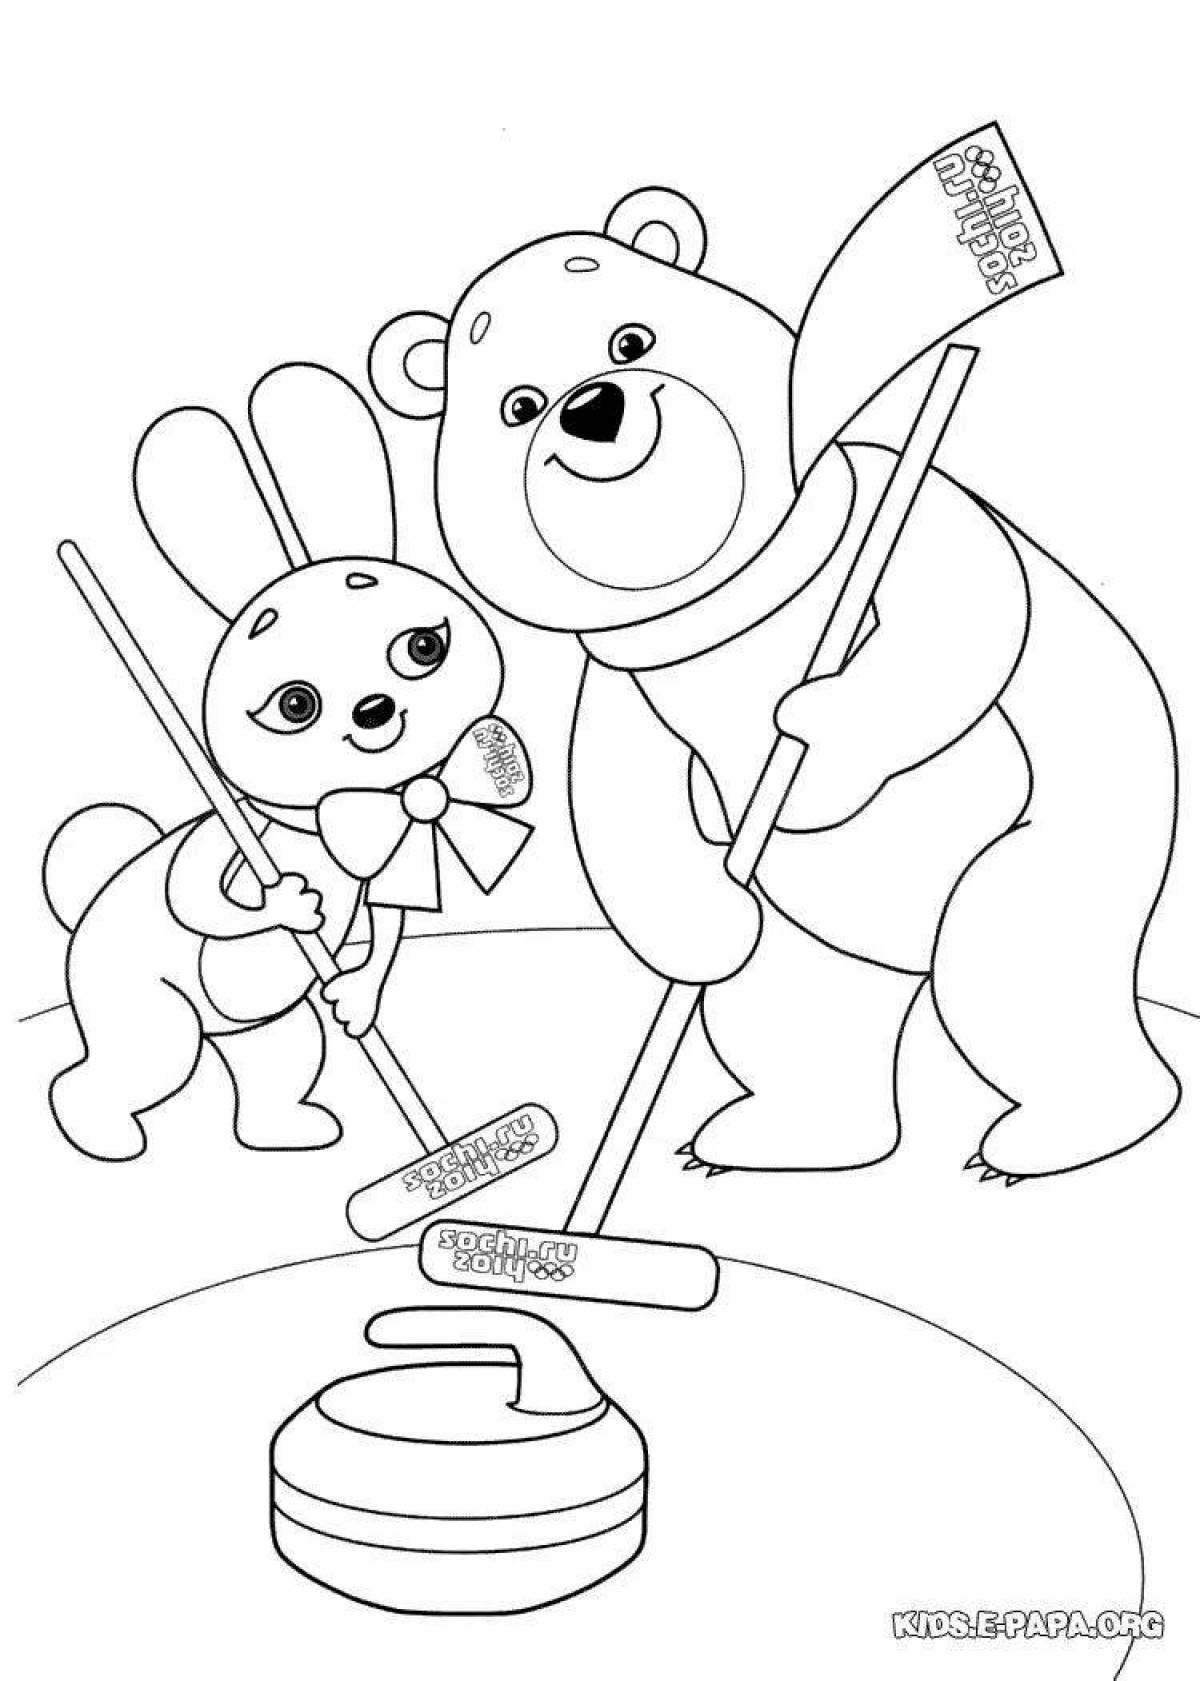 Coloring page tempting winter olympic games